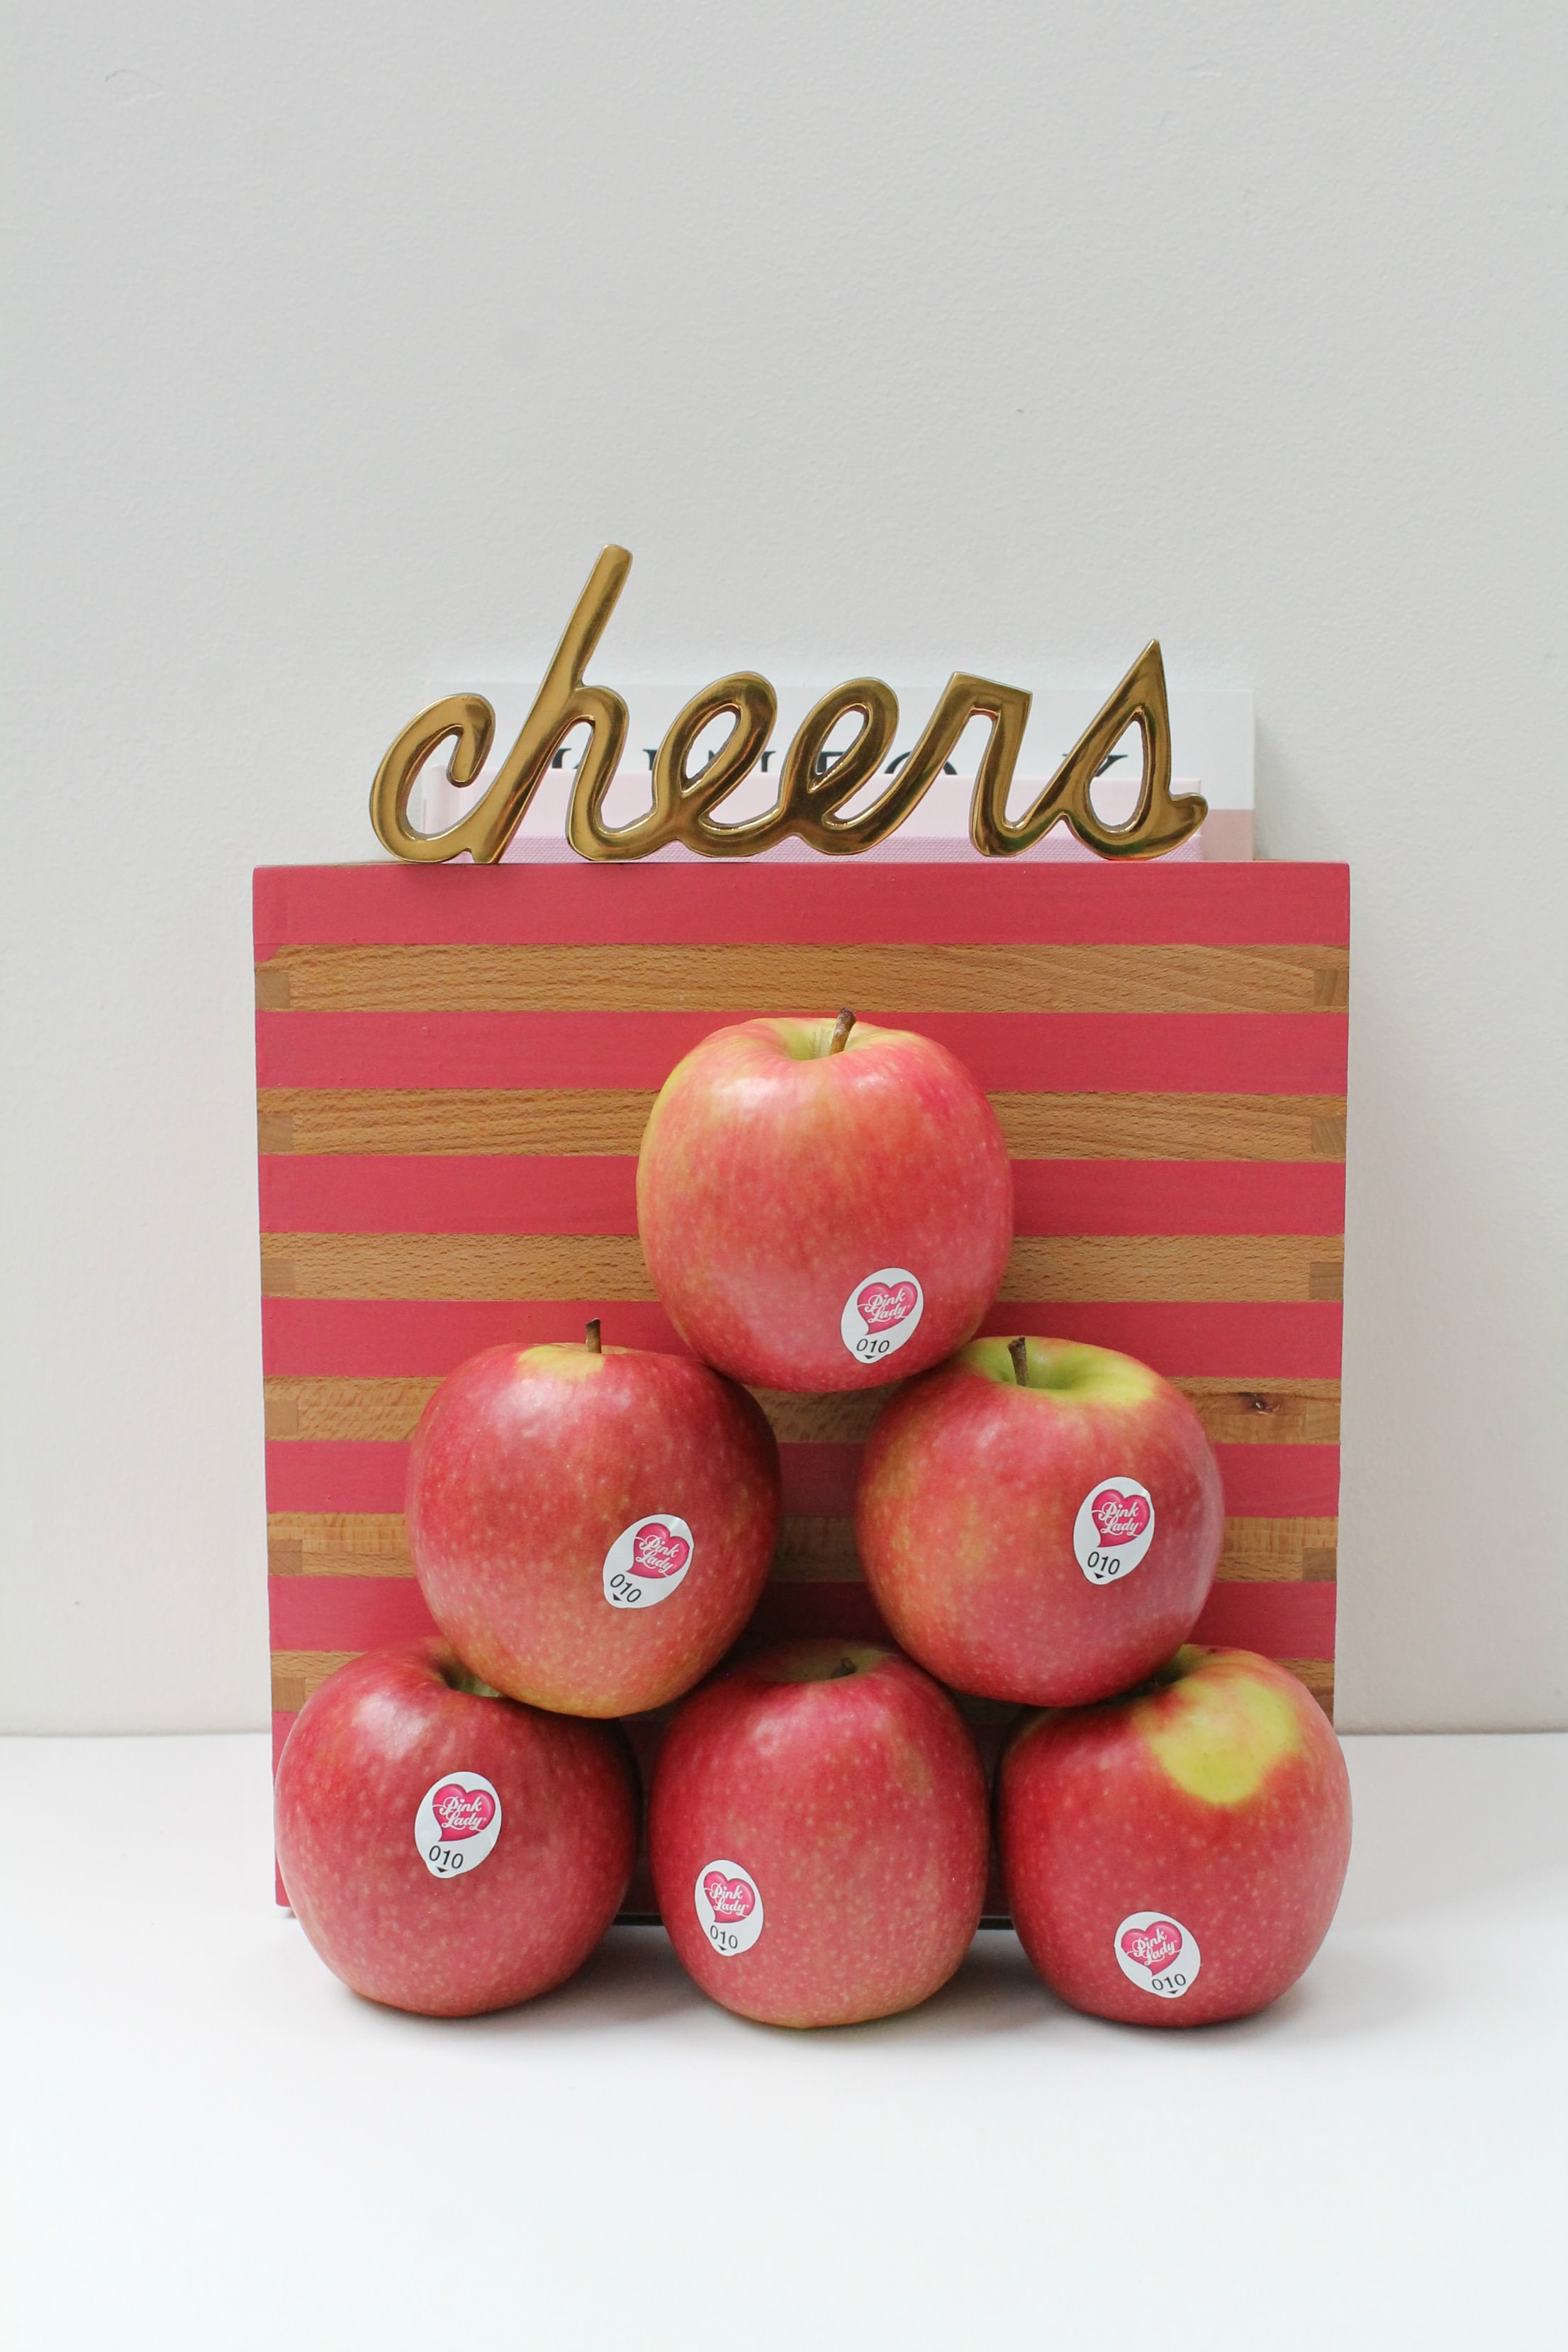 Pink-Lady-apples-photo-by-Geraldine-Tan-Little-Big-Bell